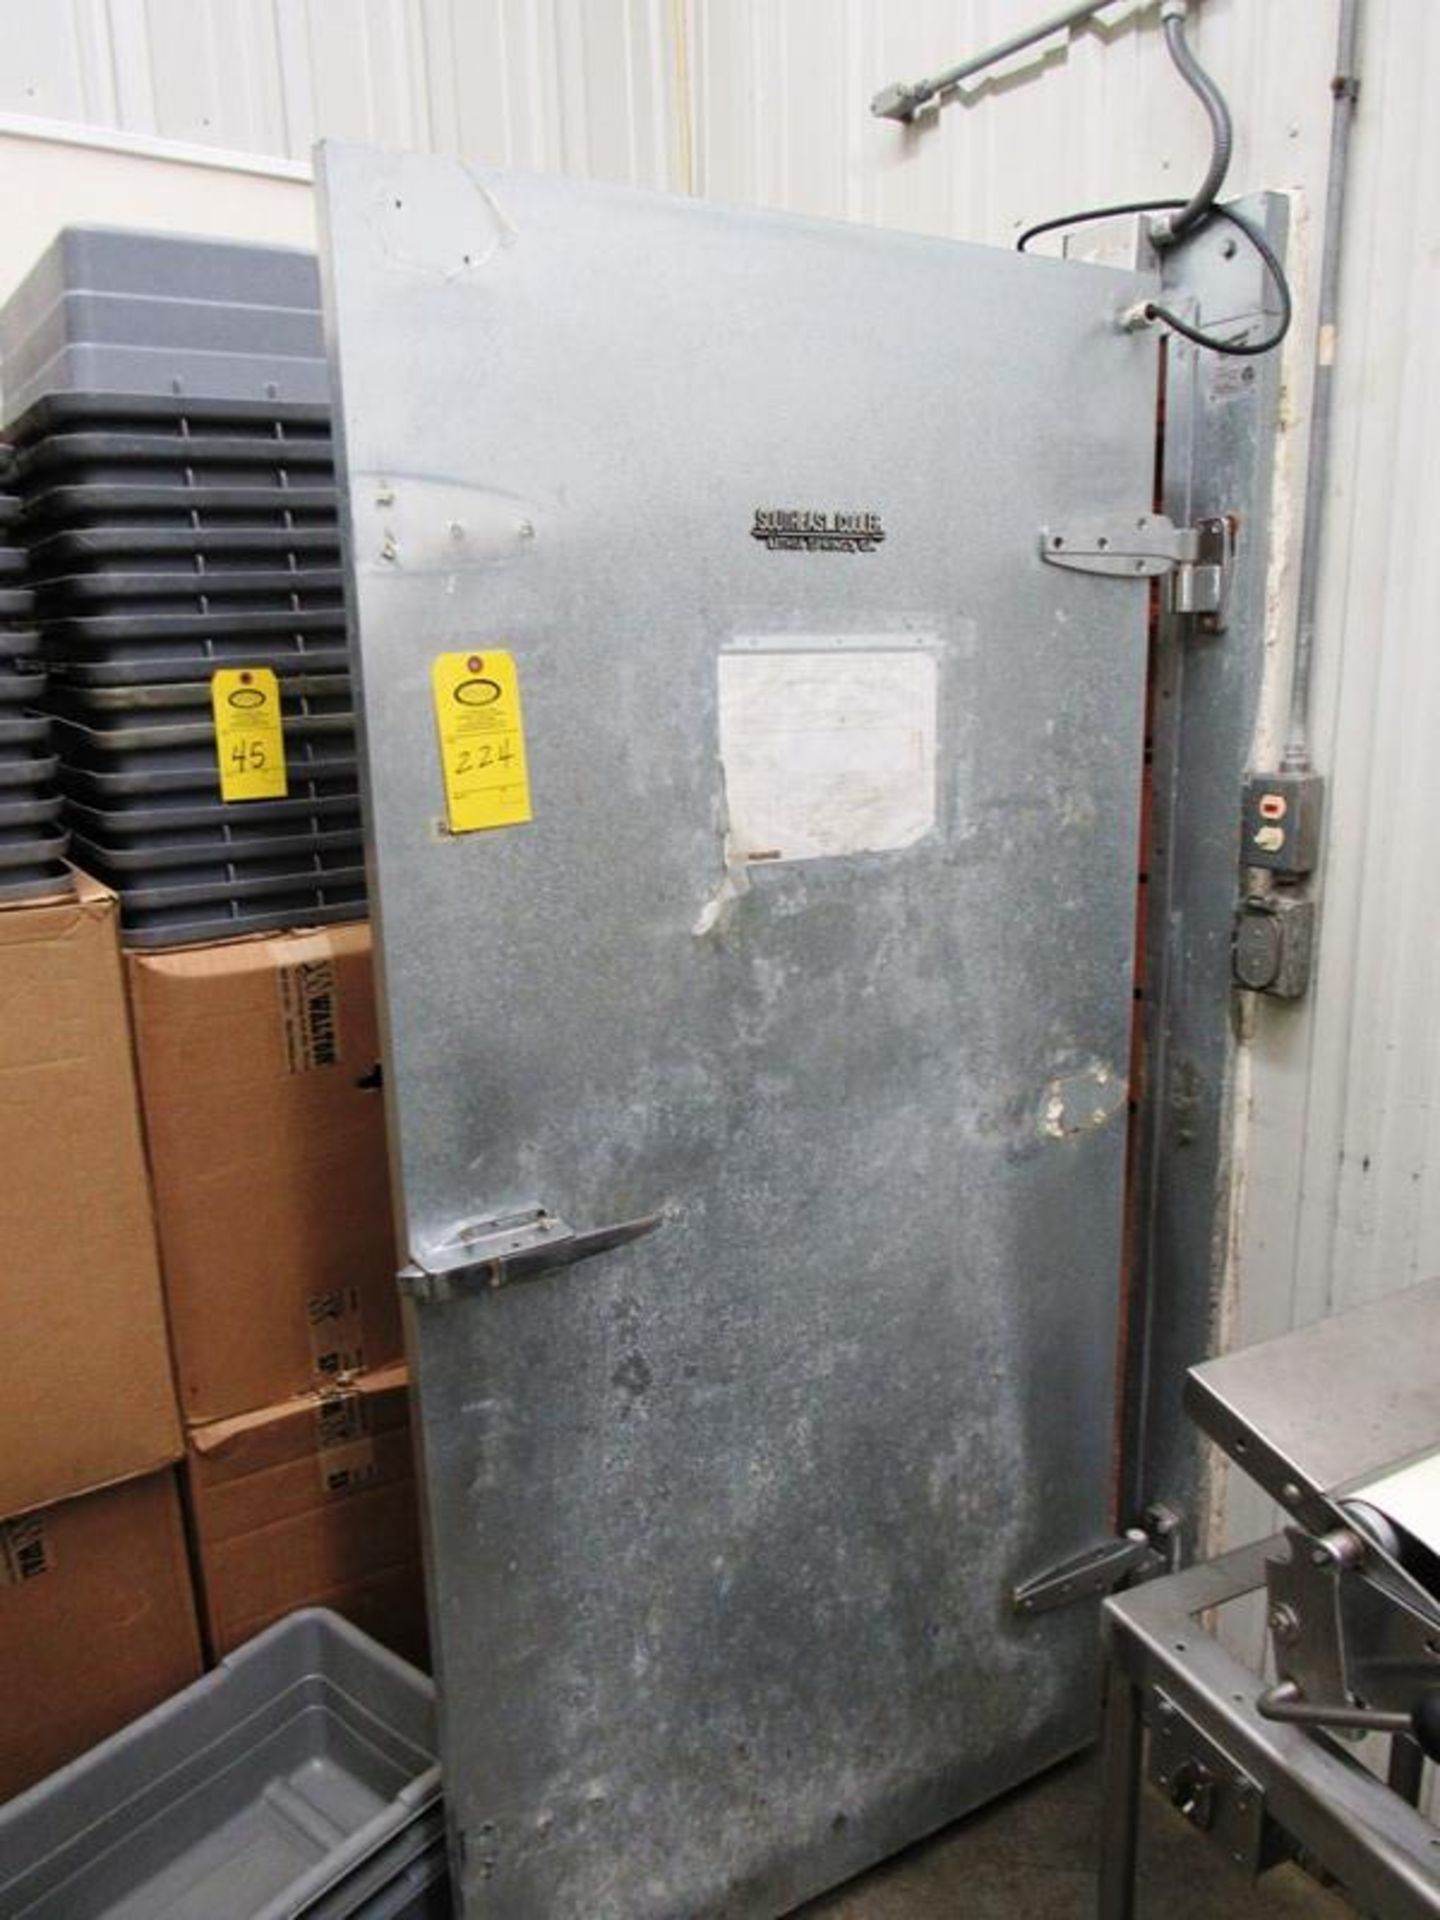 Southeast Cooler Brand Mdl. F06 535 Freezer Door, 6" thick X 38" wide X 78 1/2" tall with frame